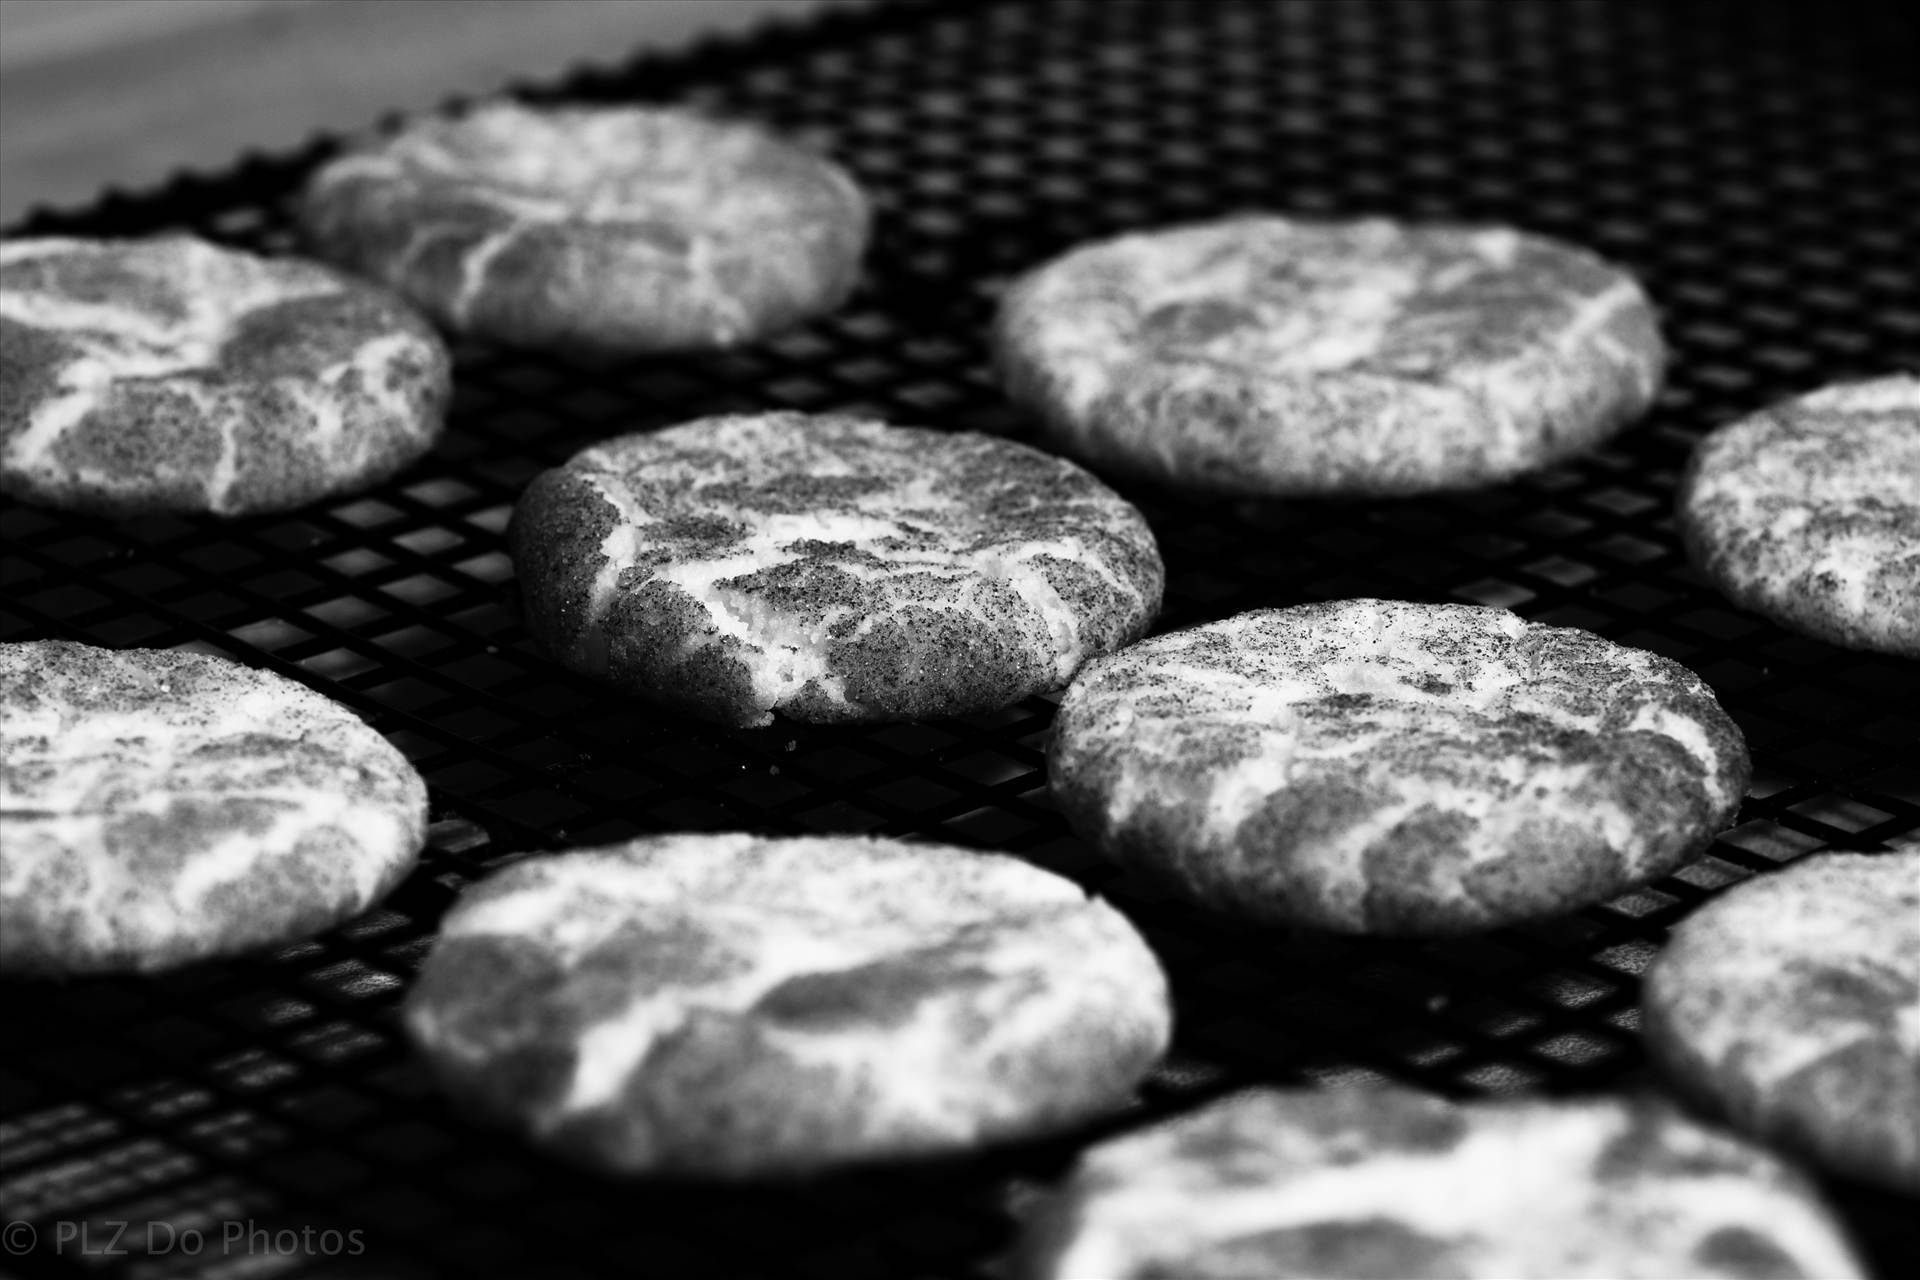 snickerdoodles bnw.jpg undefined by 853012158068080